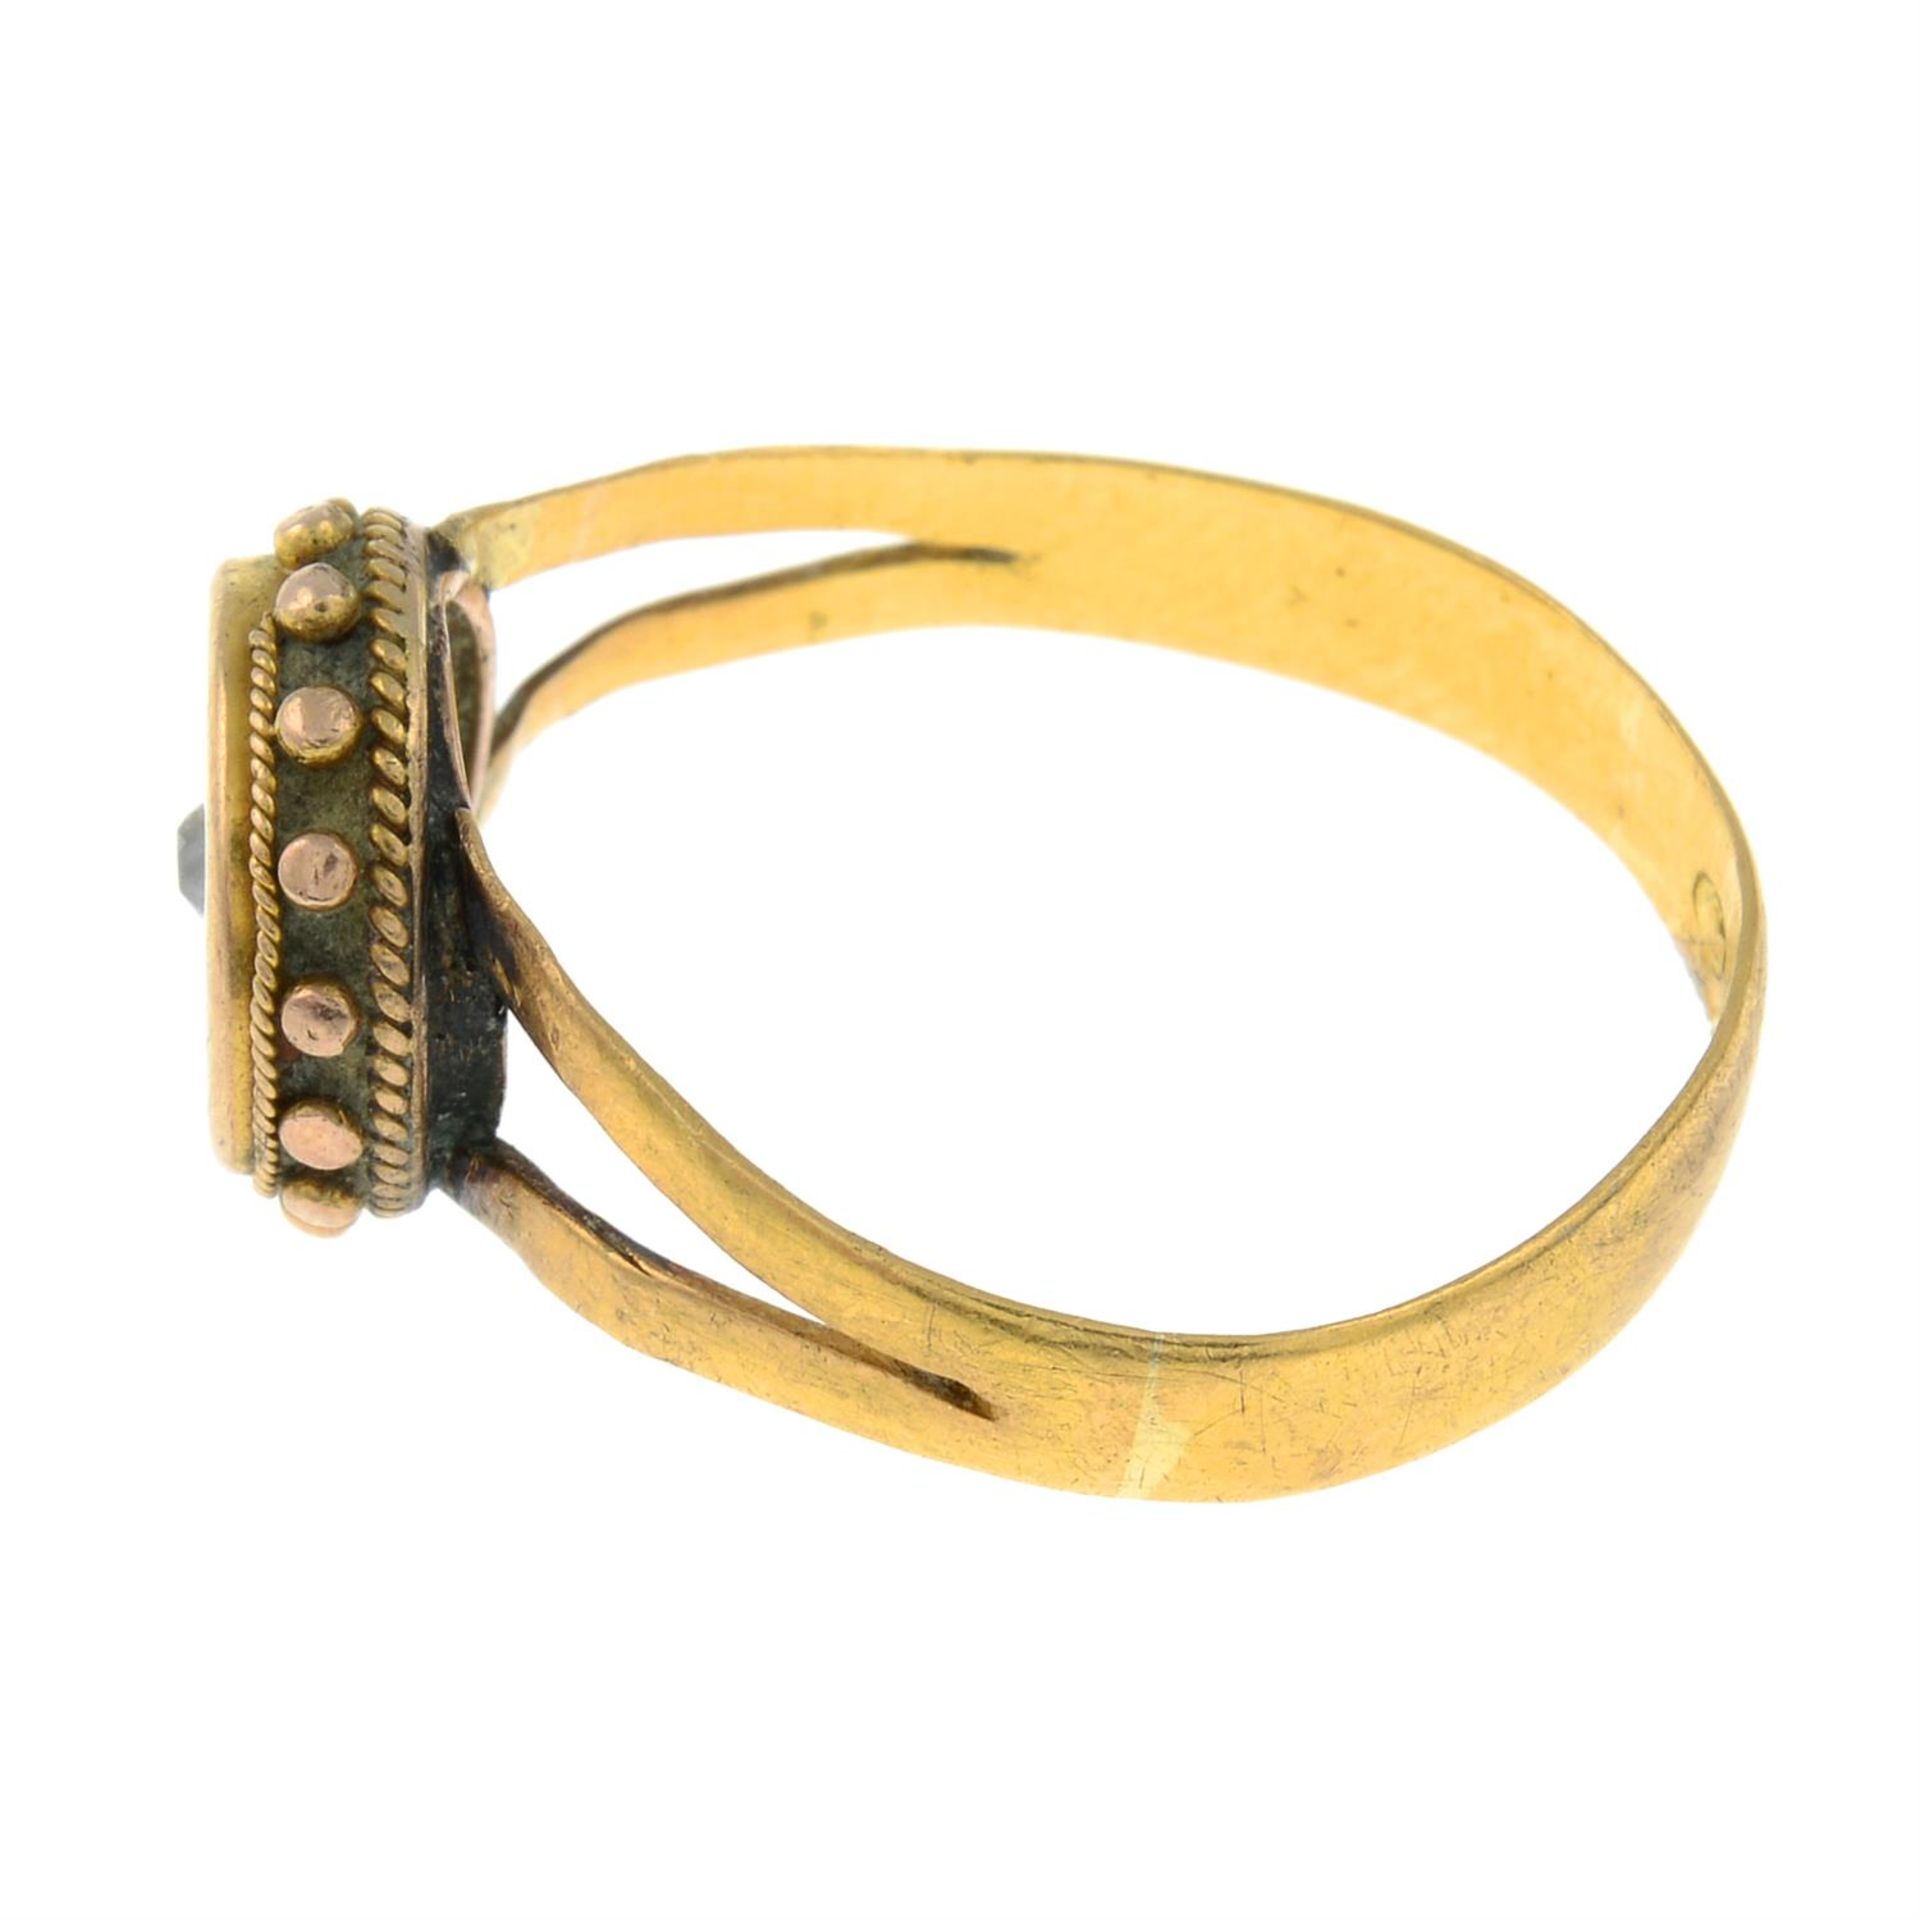 A late 19th century gold, old-cut diamond ring. - Image 2 of 3